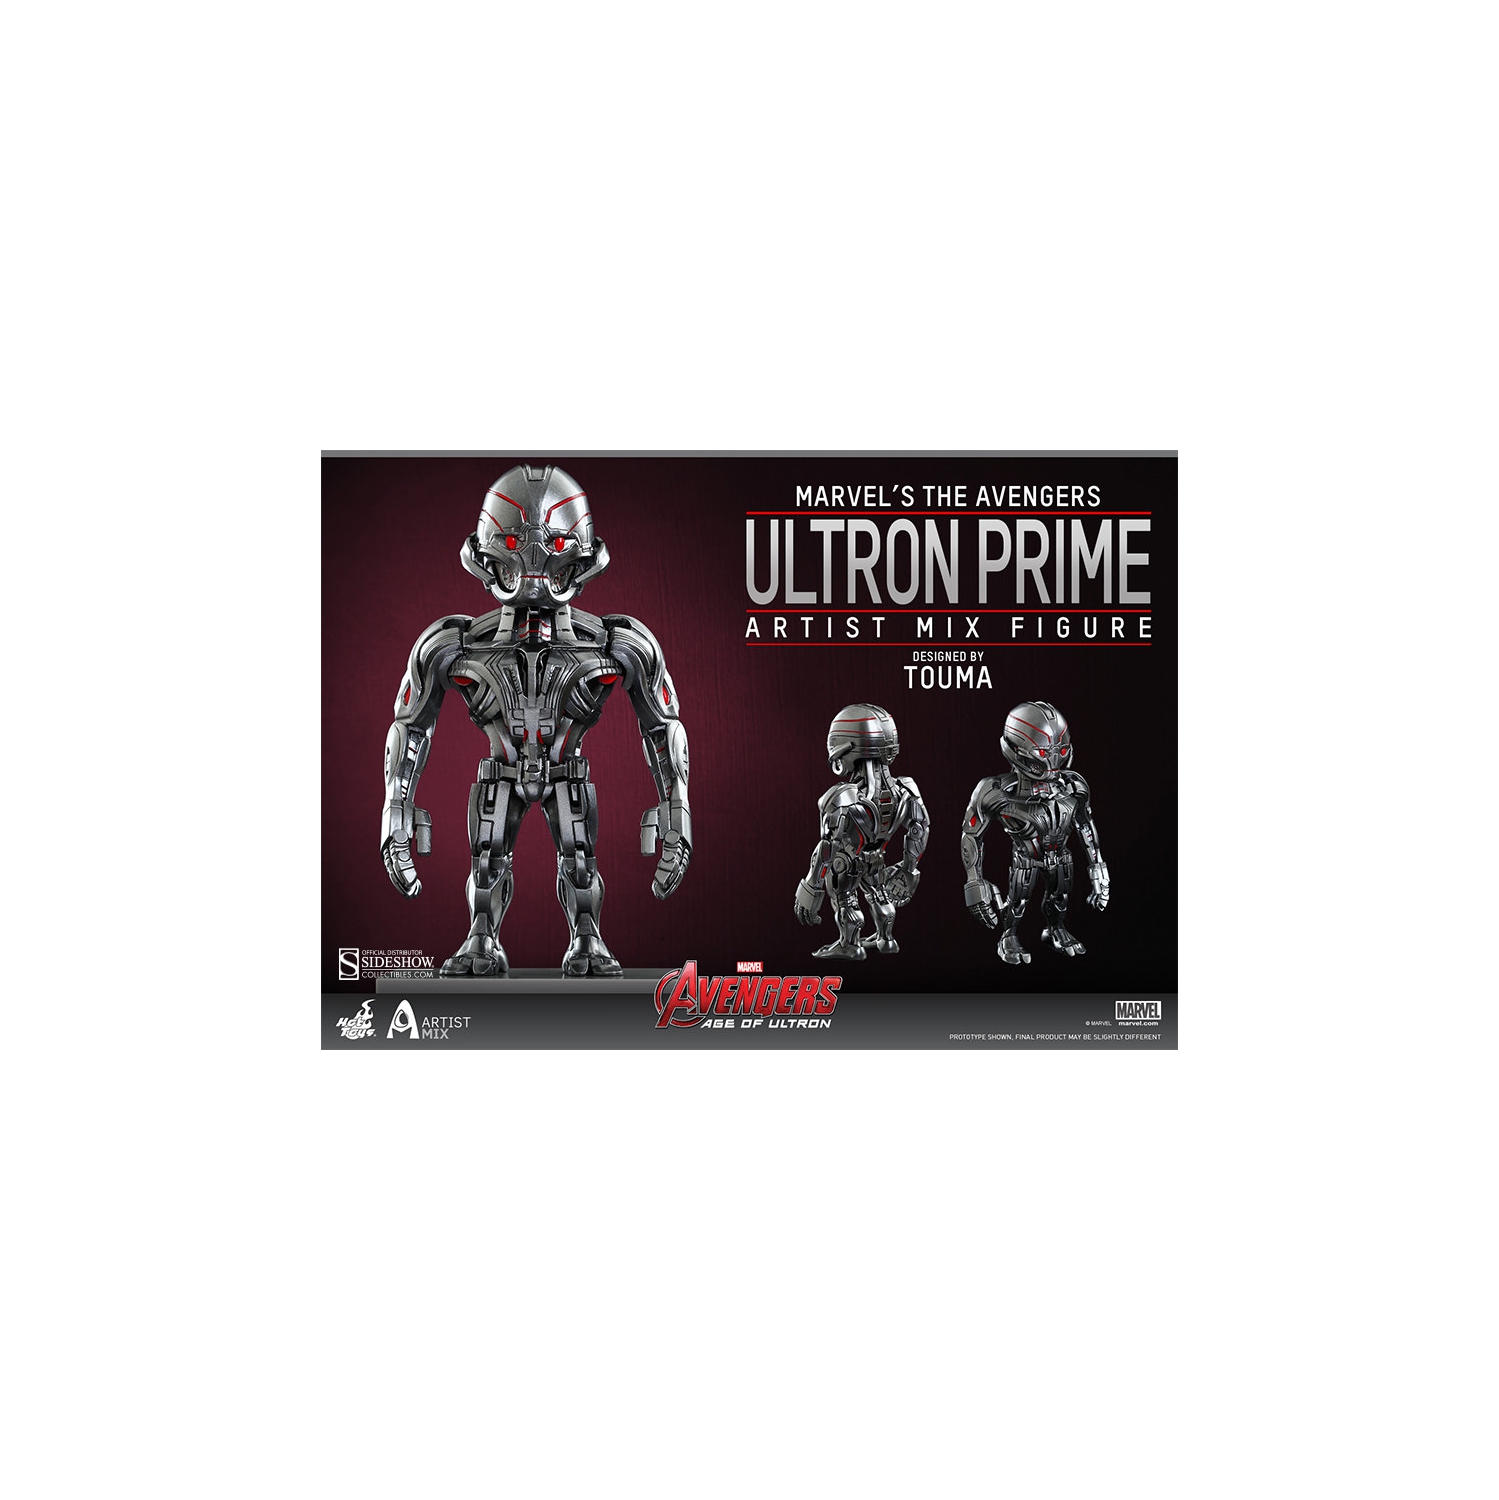 Avengers: Age of Ultron 5 Inch Action Figure Artist Mix Series 1 - Ultron Prime Hot Toys